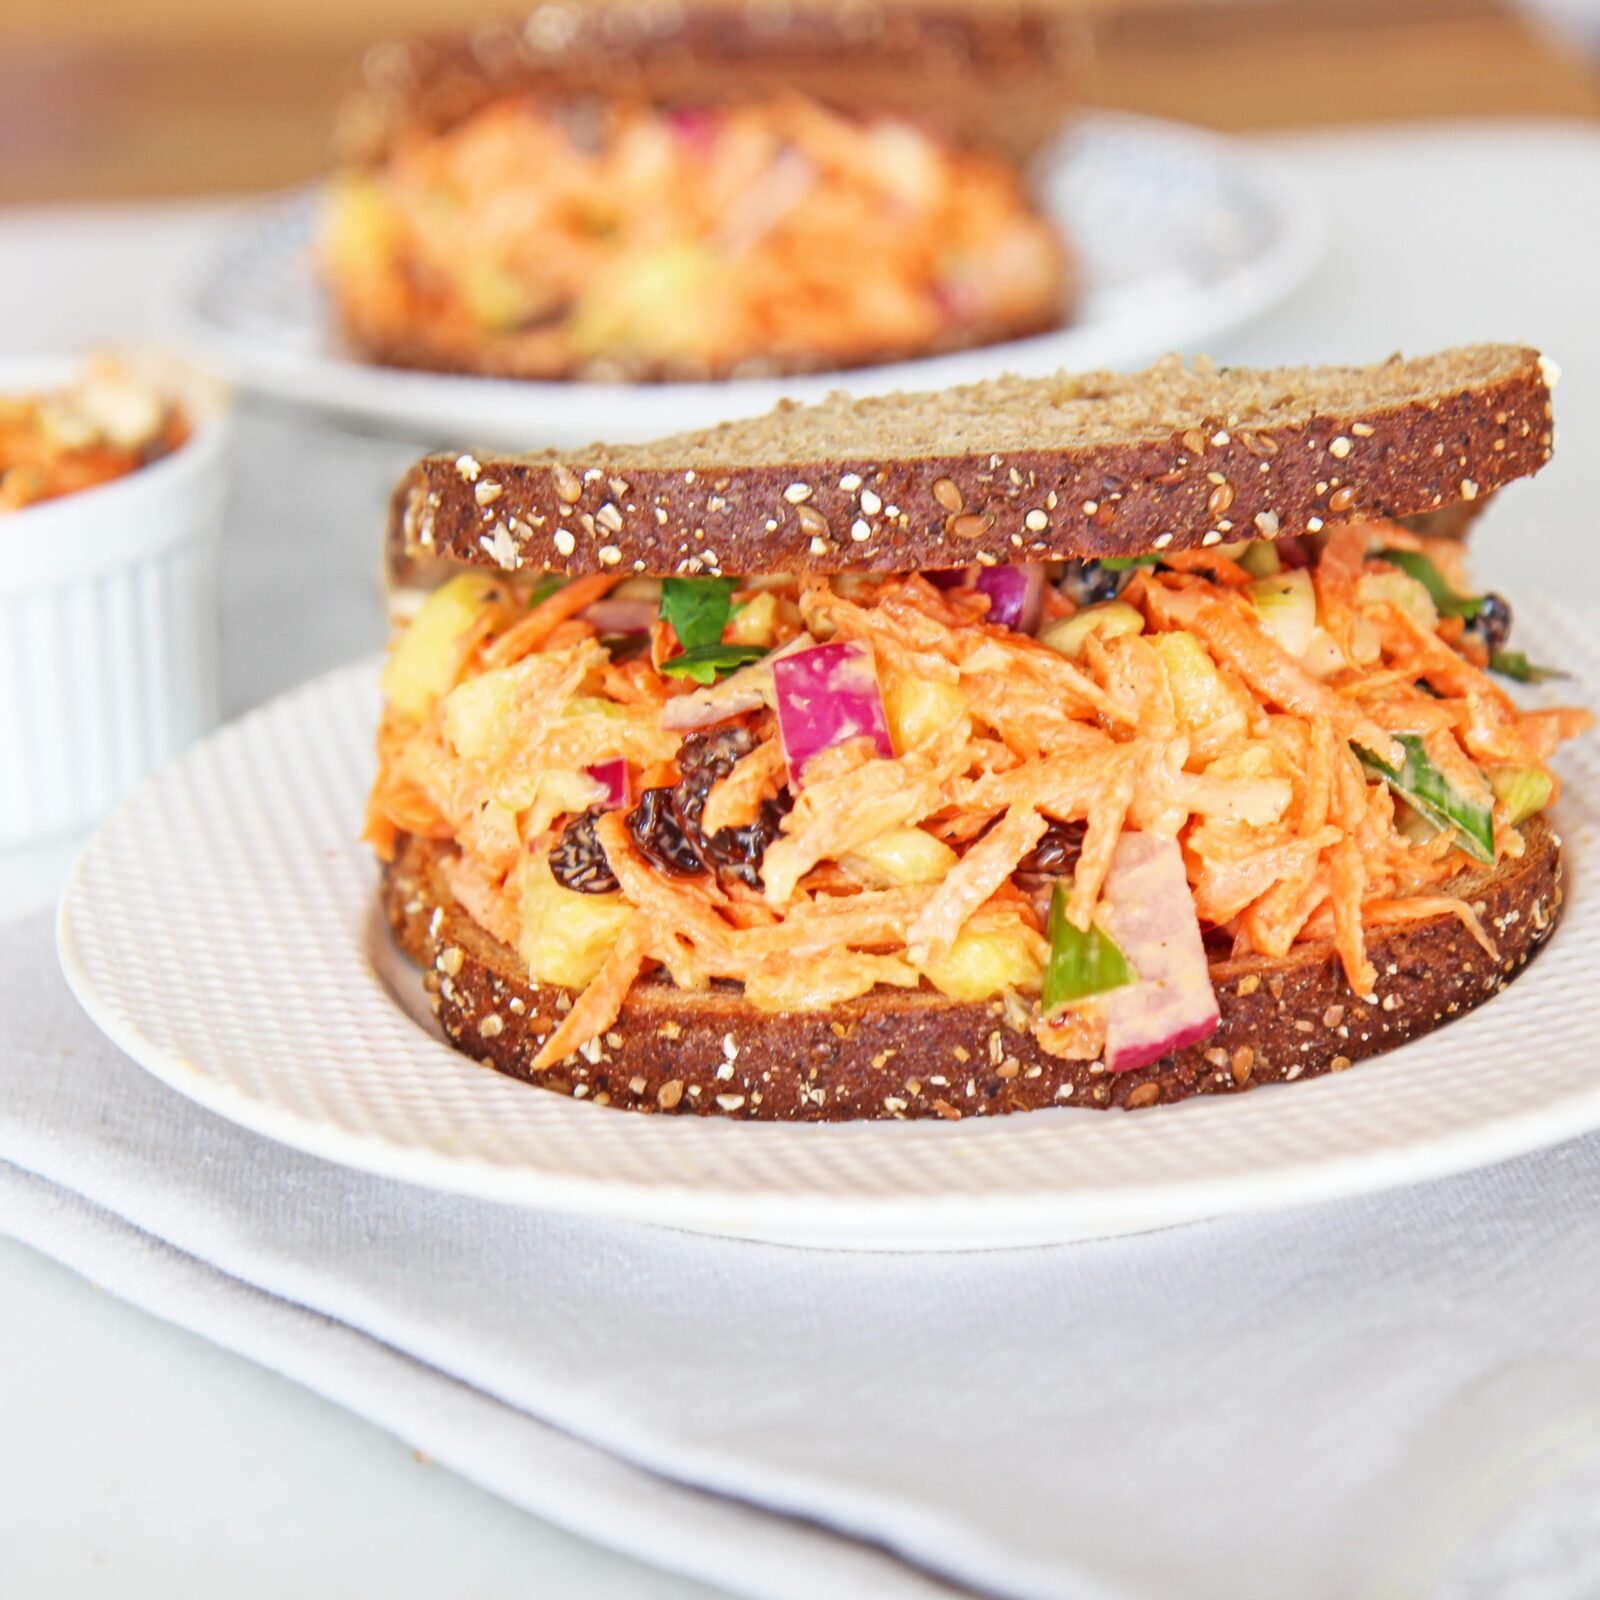 Carrot Salad Sandwich Recipe. This is a perfect vegetarian sandwich recipe that is healthy. This is from The Happy Sandwich Cookbook that has 50 recipes for busy people. www.ChopHappy.com #vegetariansandwich #sandwichrecipe